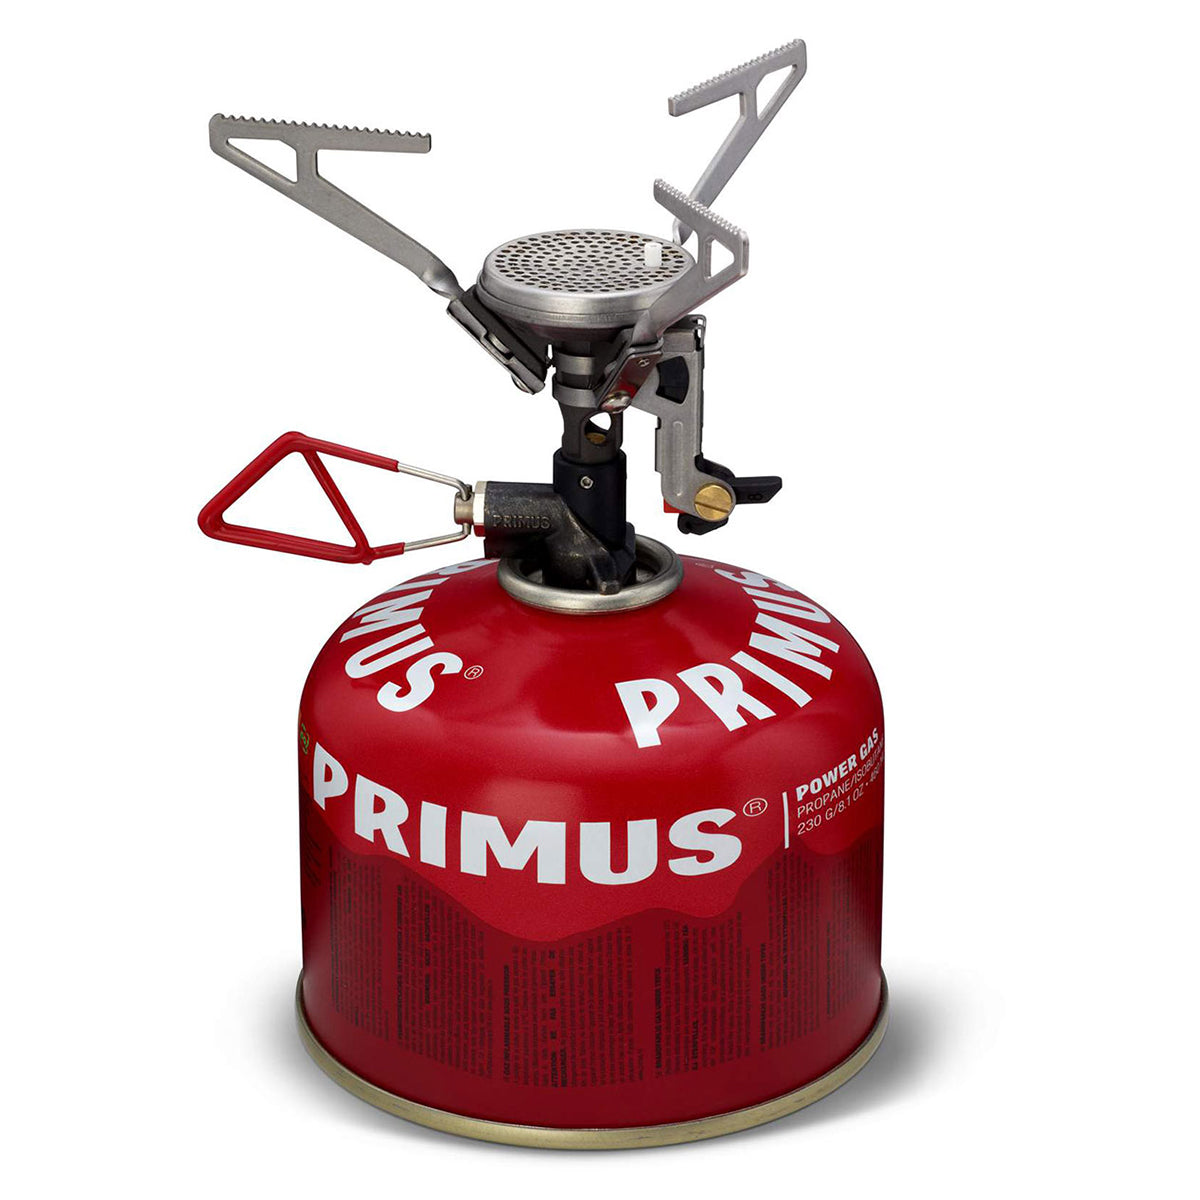 Primus Micron Trail Stove with Piezo by Primus | Camping - goHUNT Shop